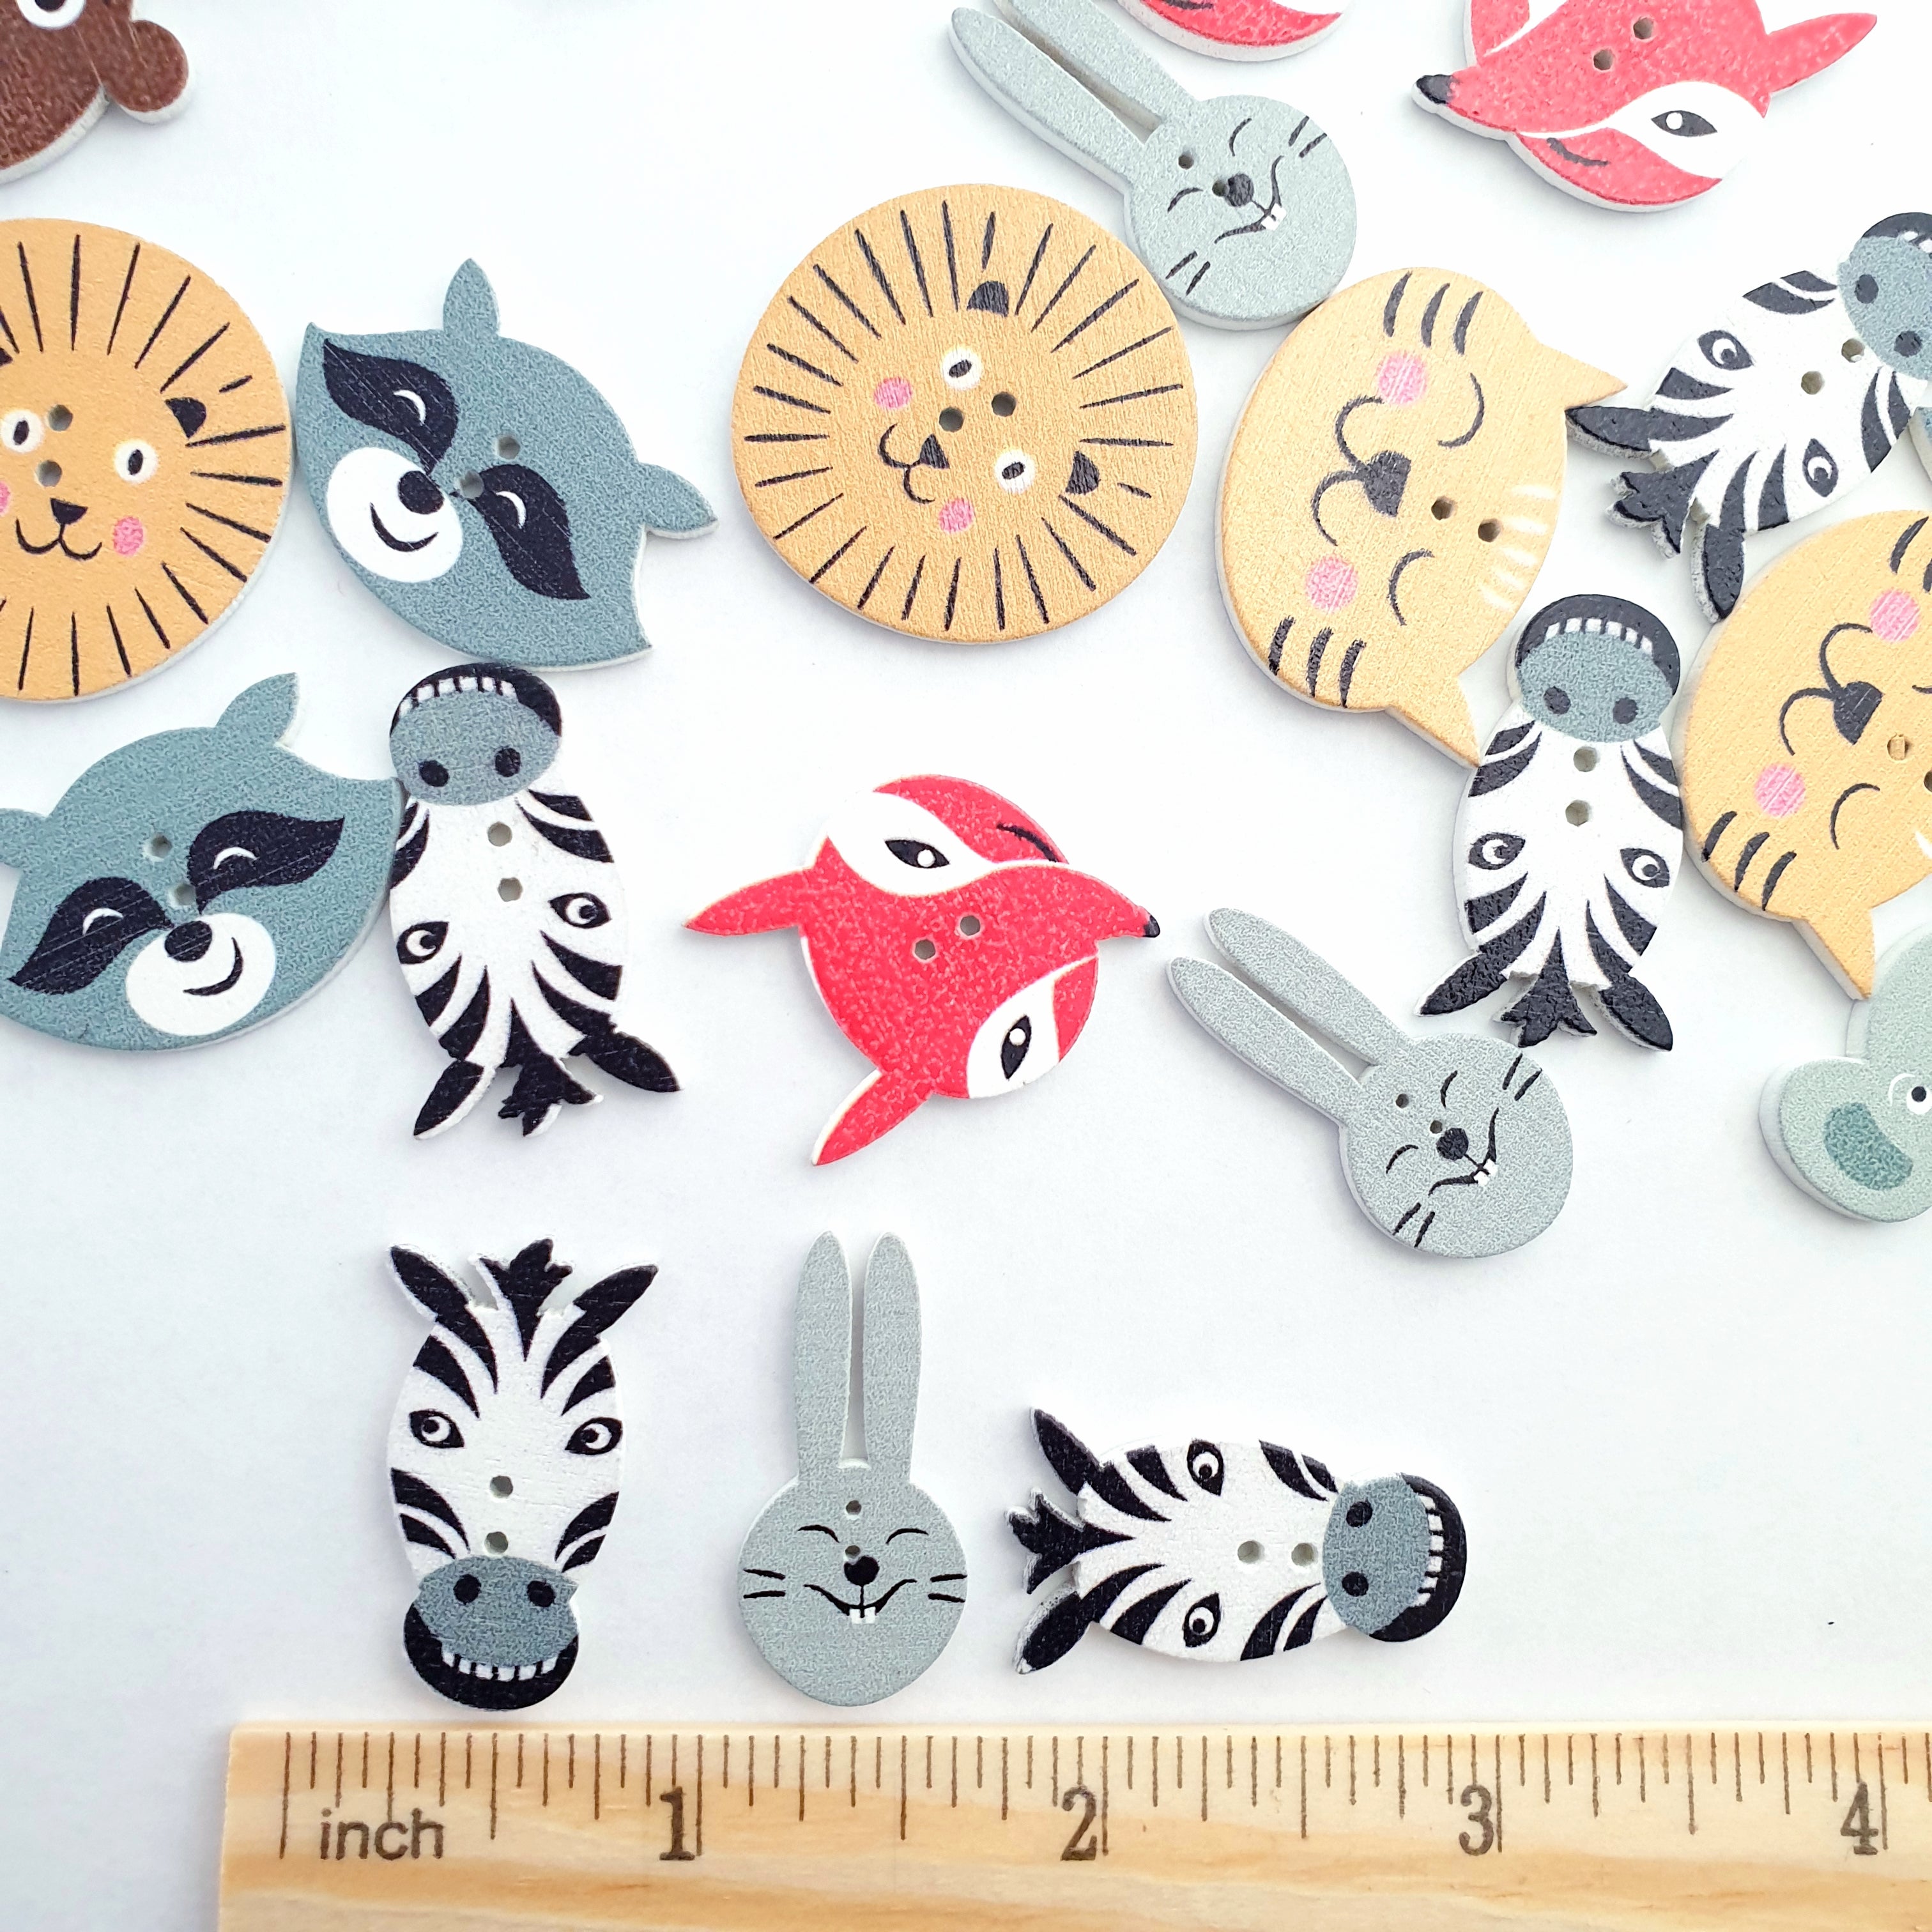 MajorCrafts 24pcs Mixed Animal Theme 2 Holes Sewing Wooden Buttons